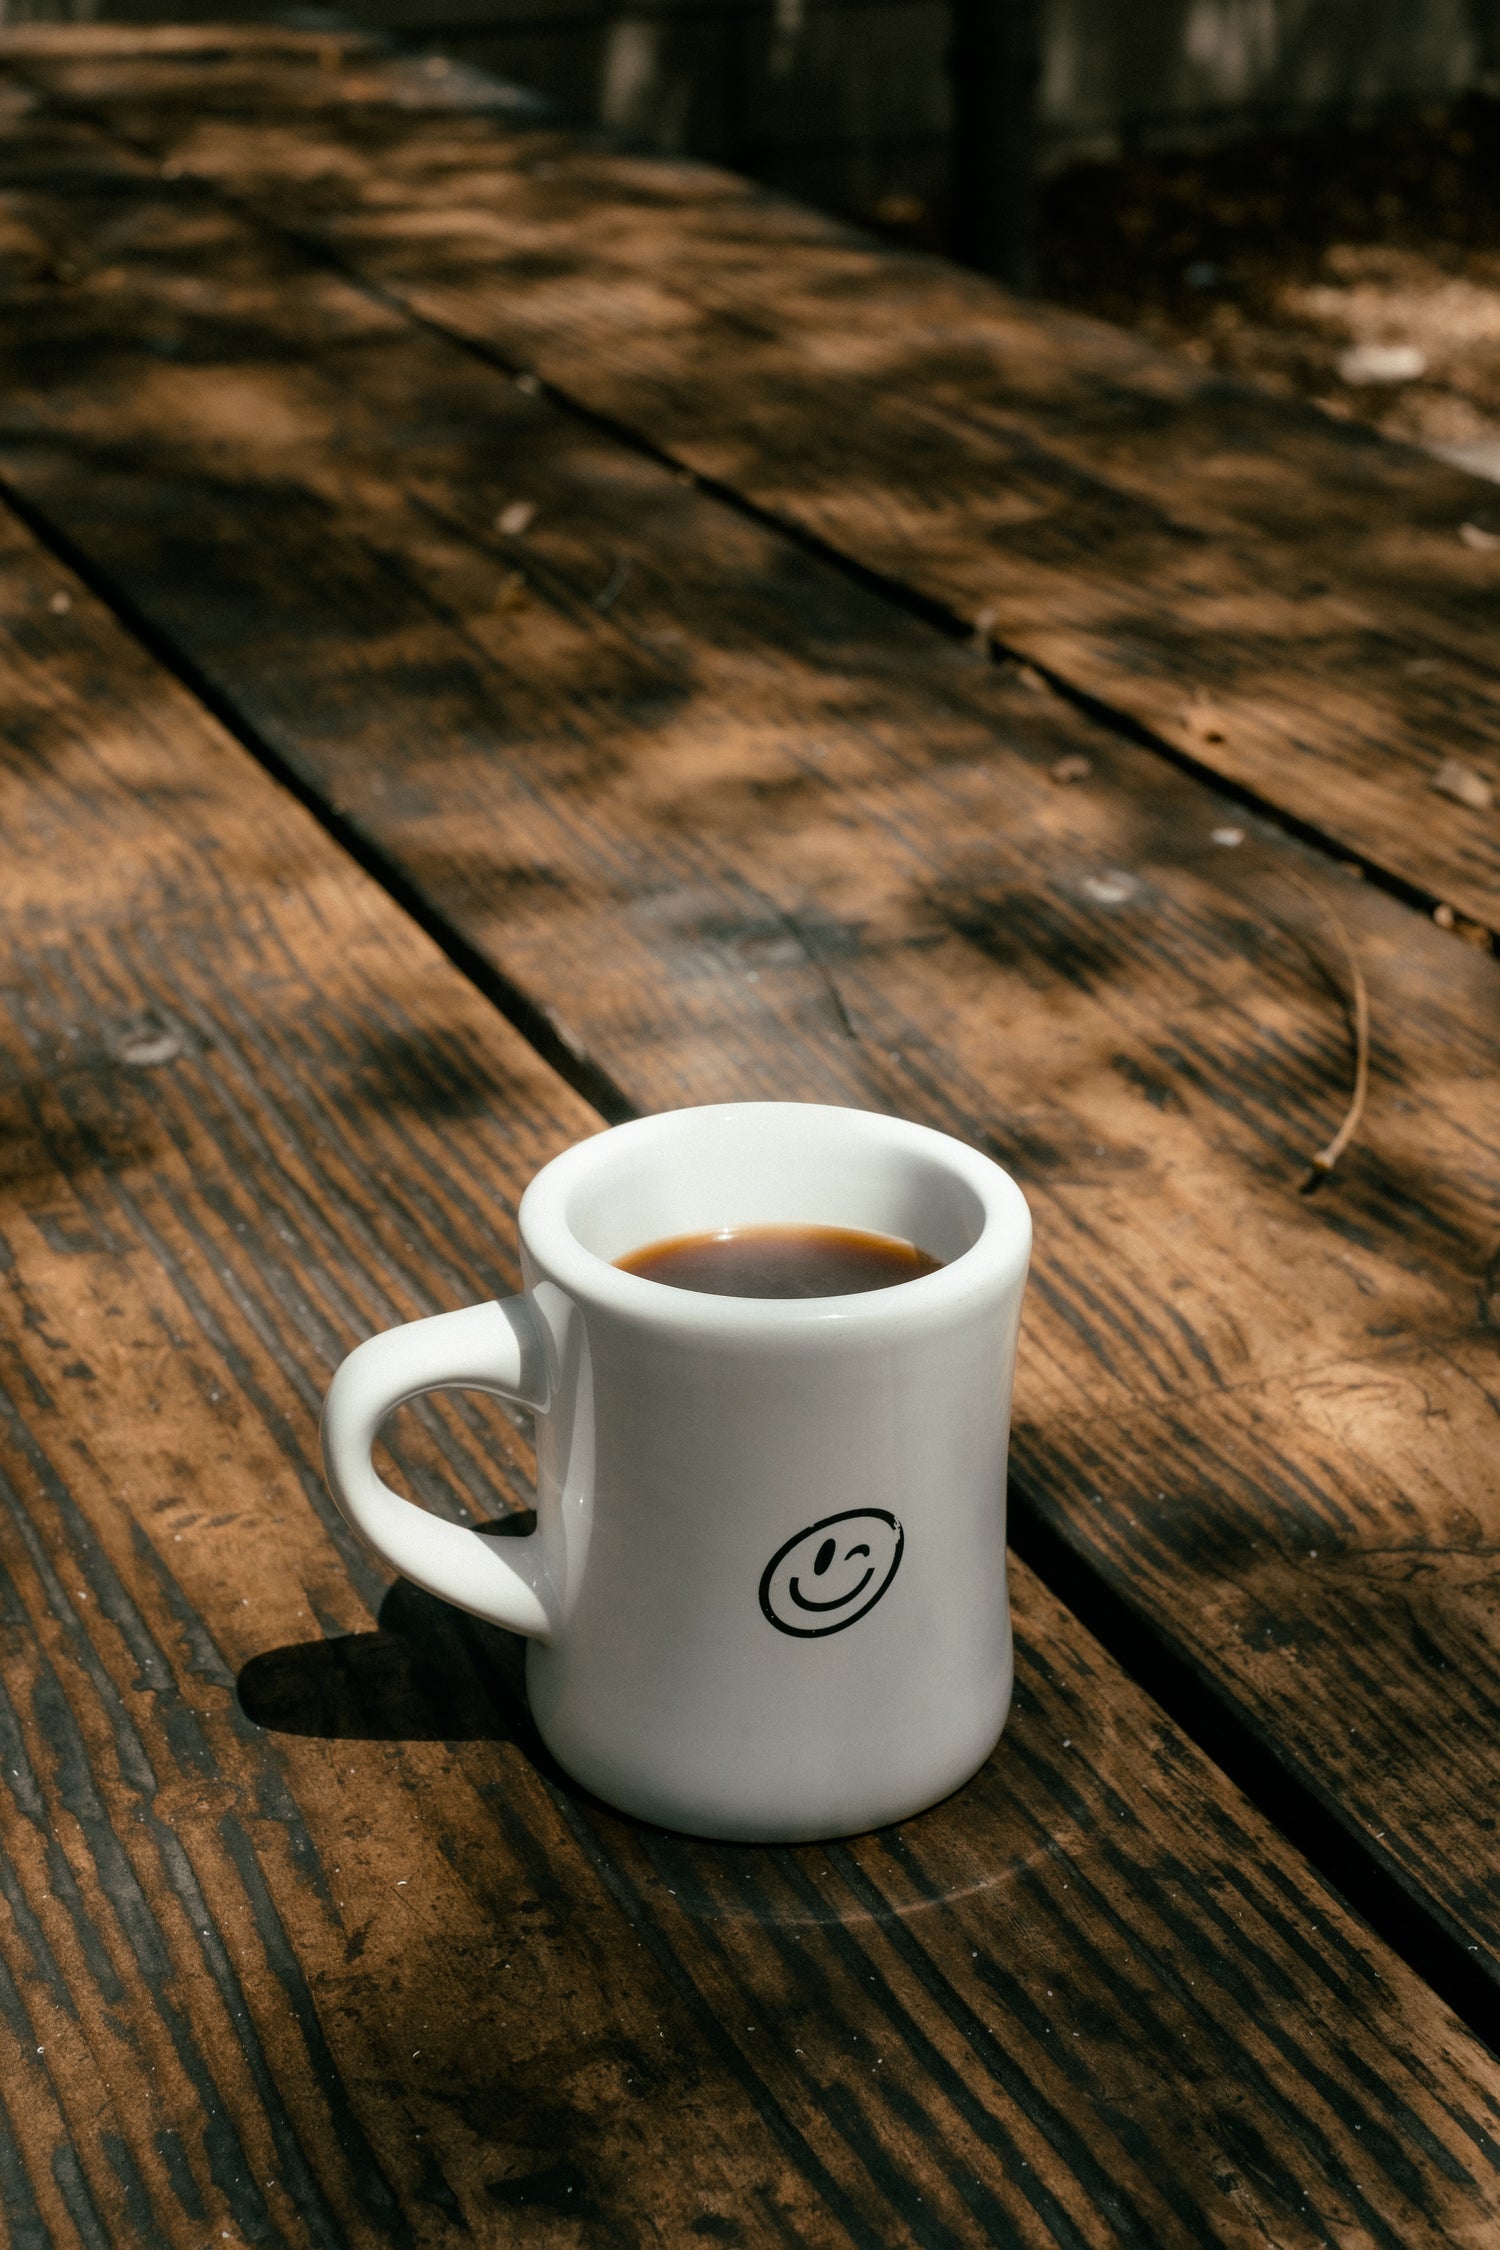 Image of a coffee cup filled with steaming coffee.